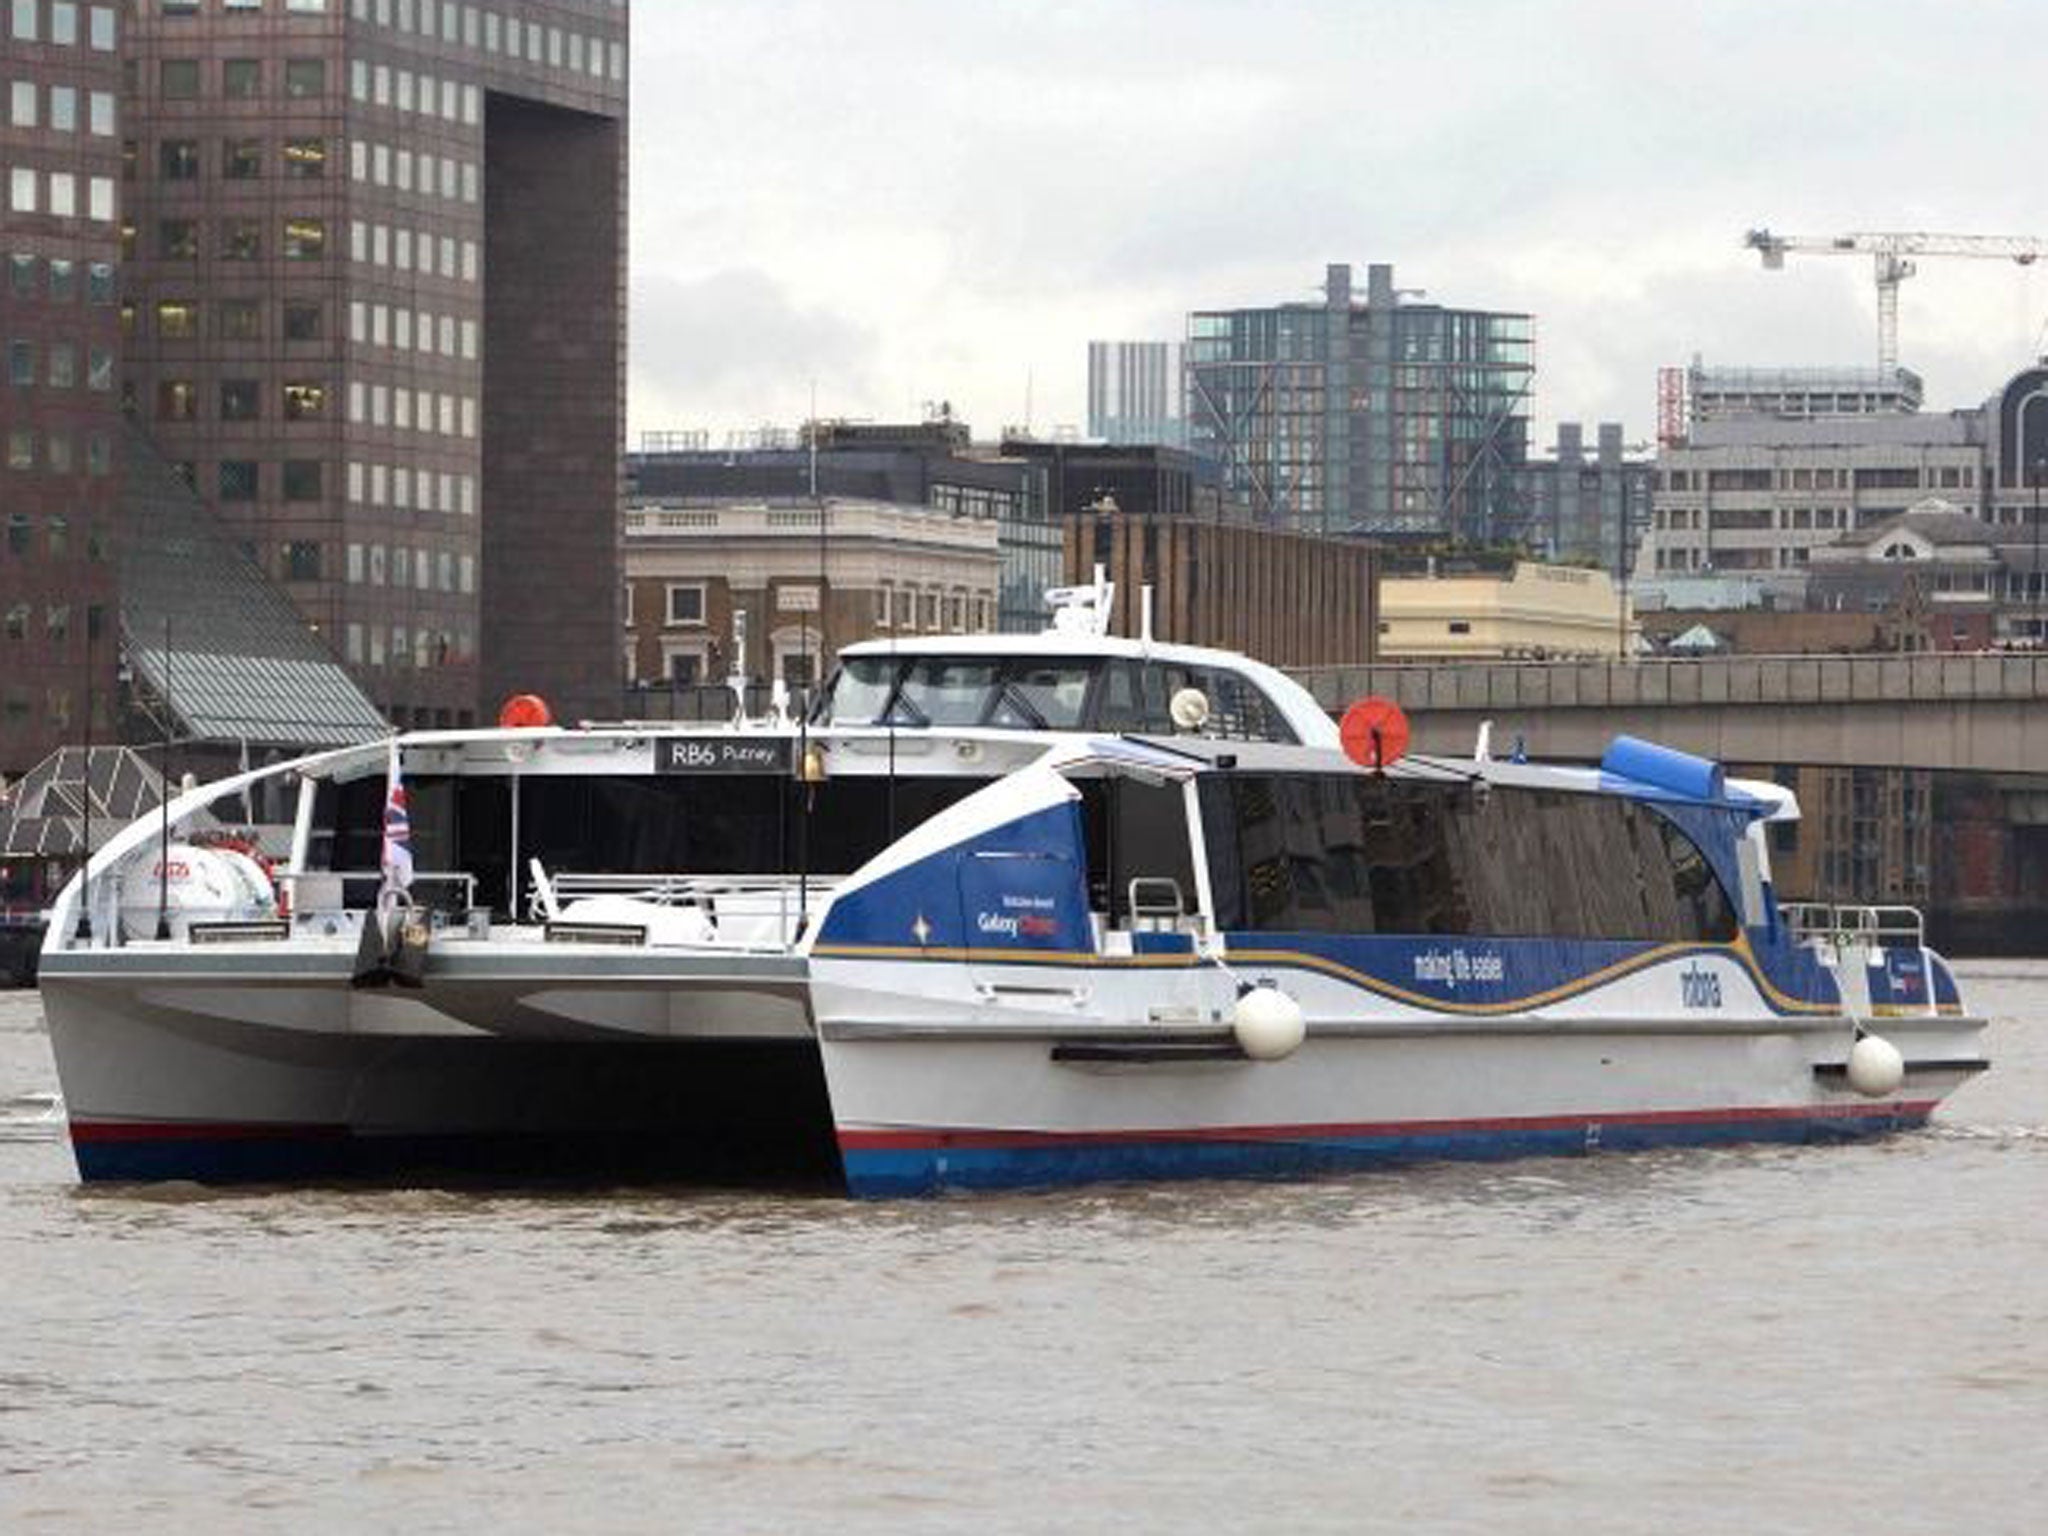 Galaxy Clipper, one of two new catamarans that have travelled over 15,000 miles from where they were built in Tasmania, Australia arrives at their new home on the River Thames in London, to join the MBNA Thames Clippers fleet